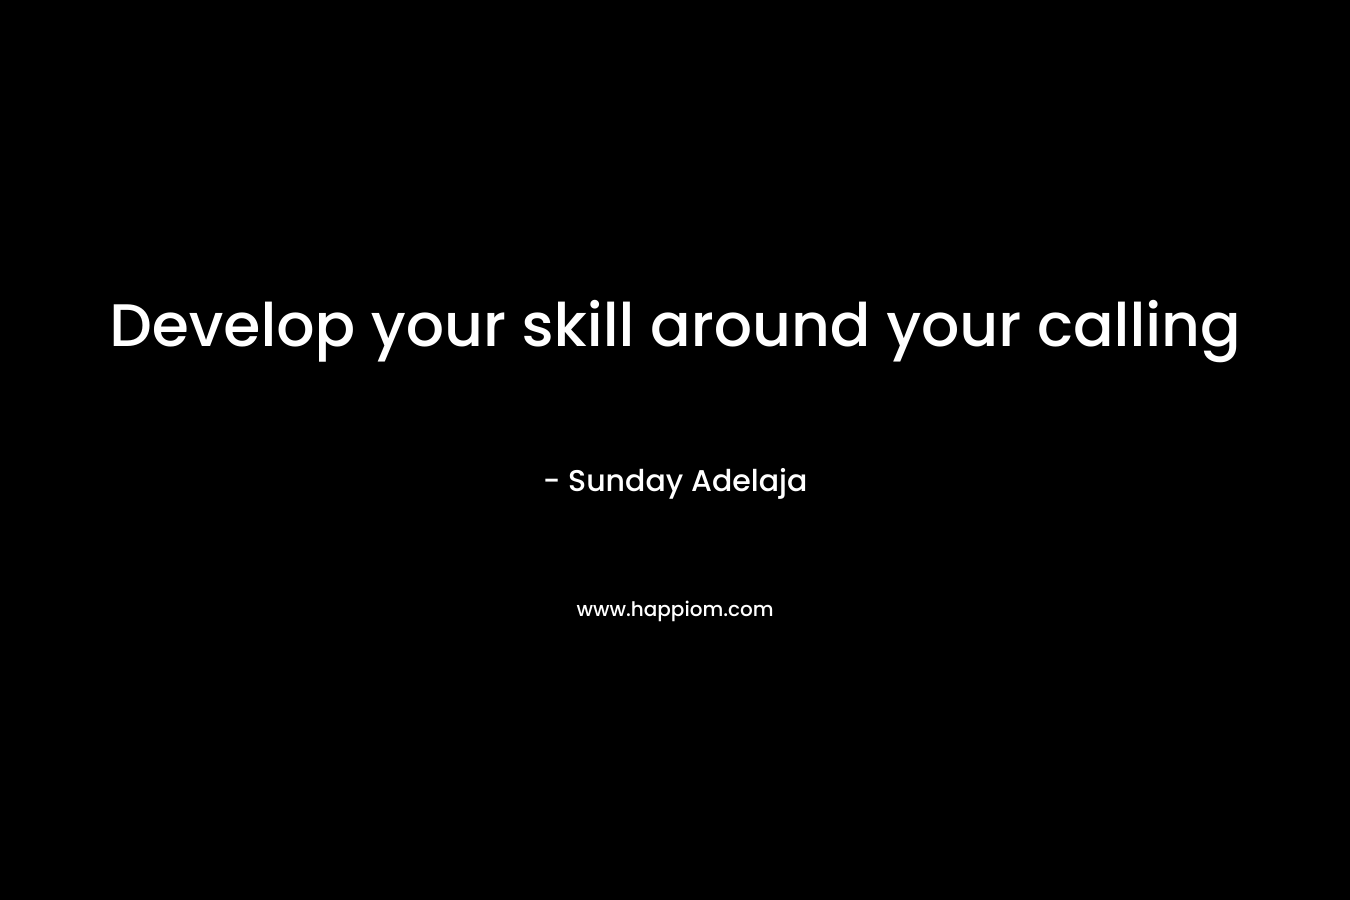 Develop your skill around your calling